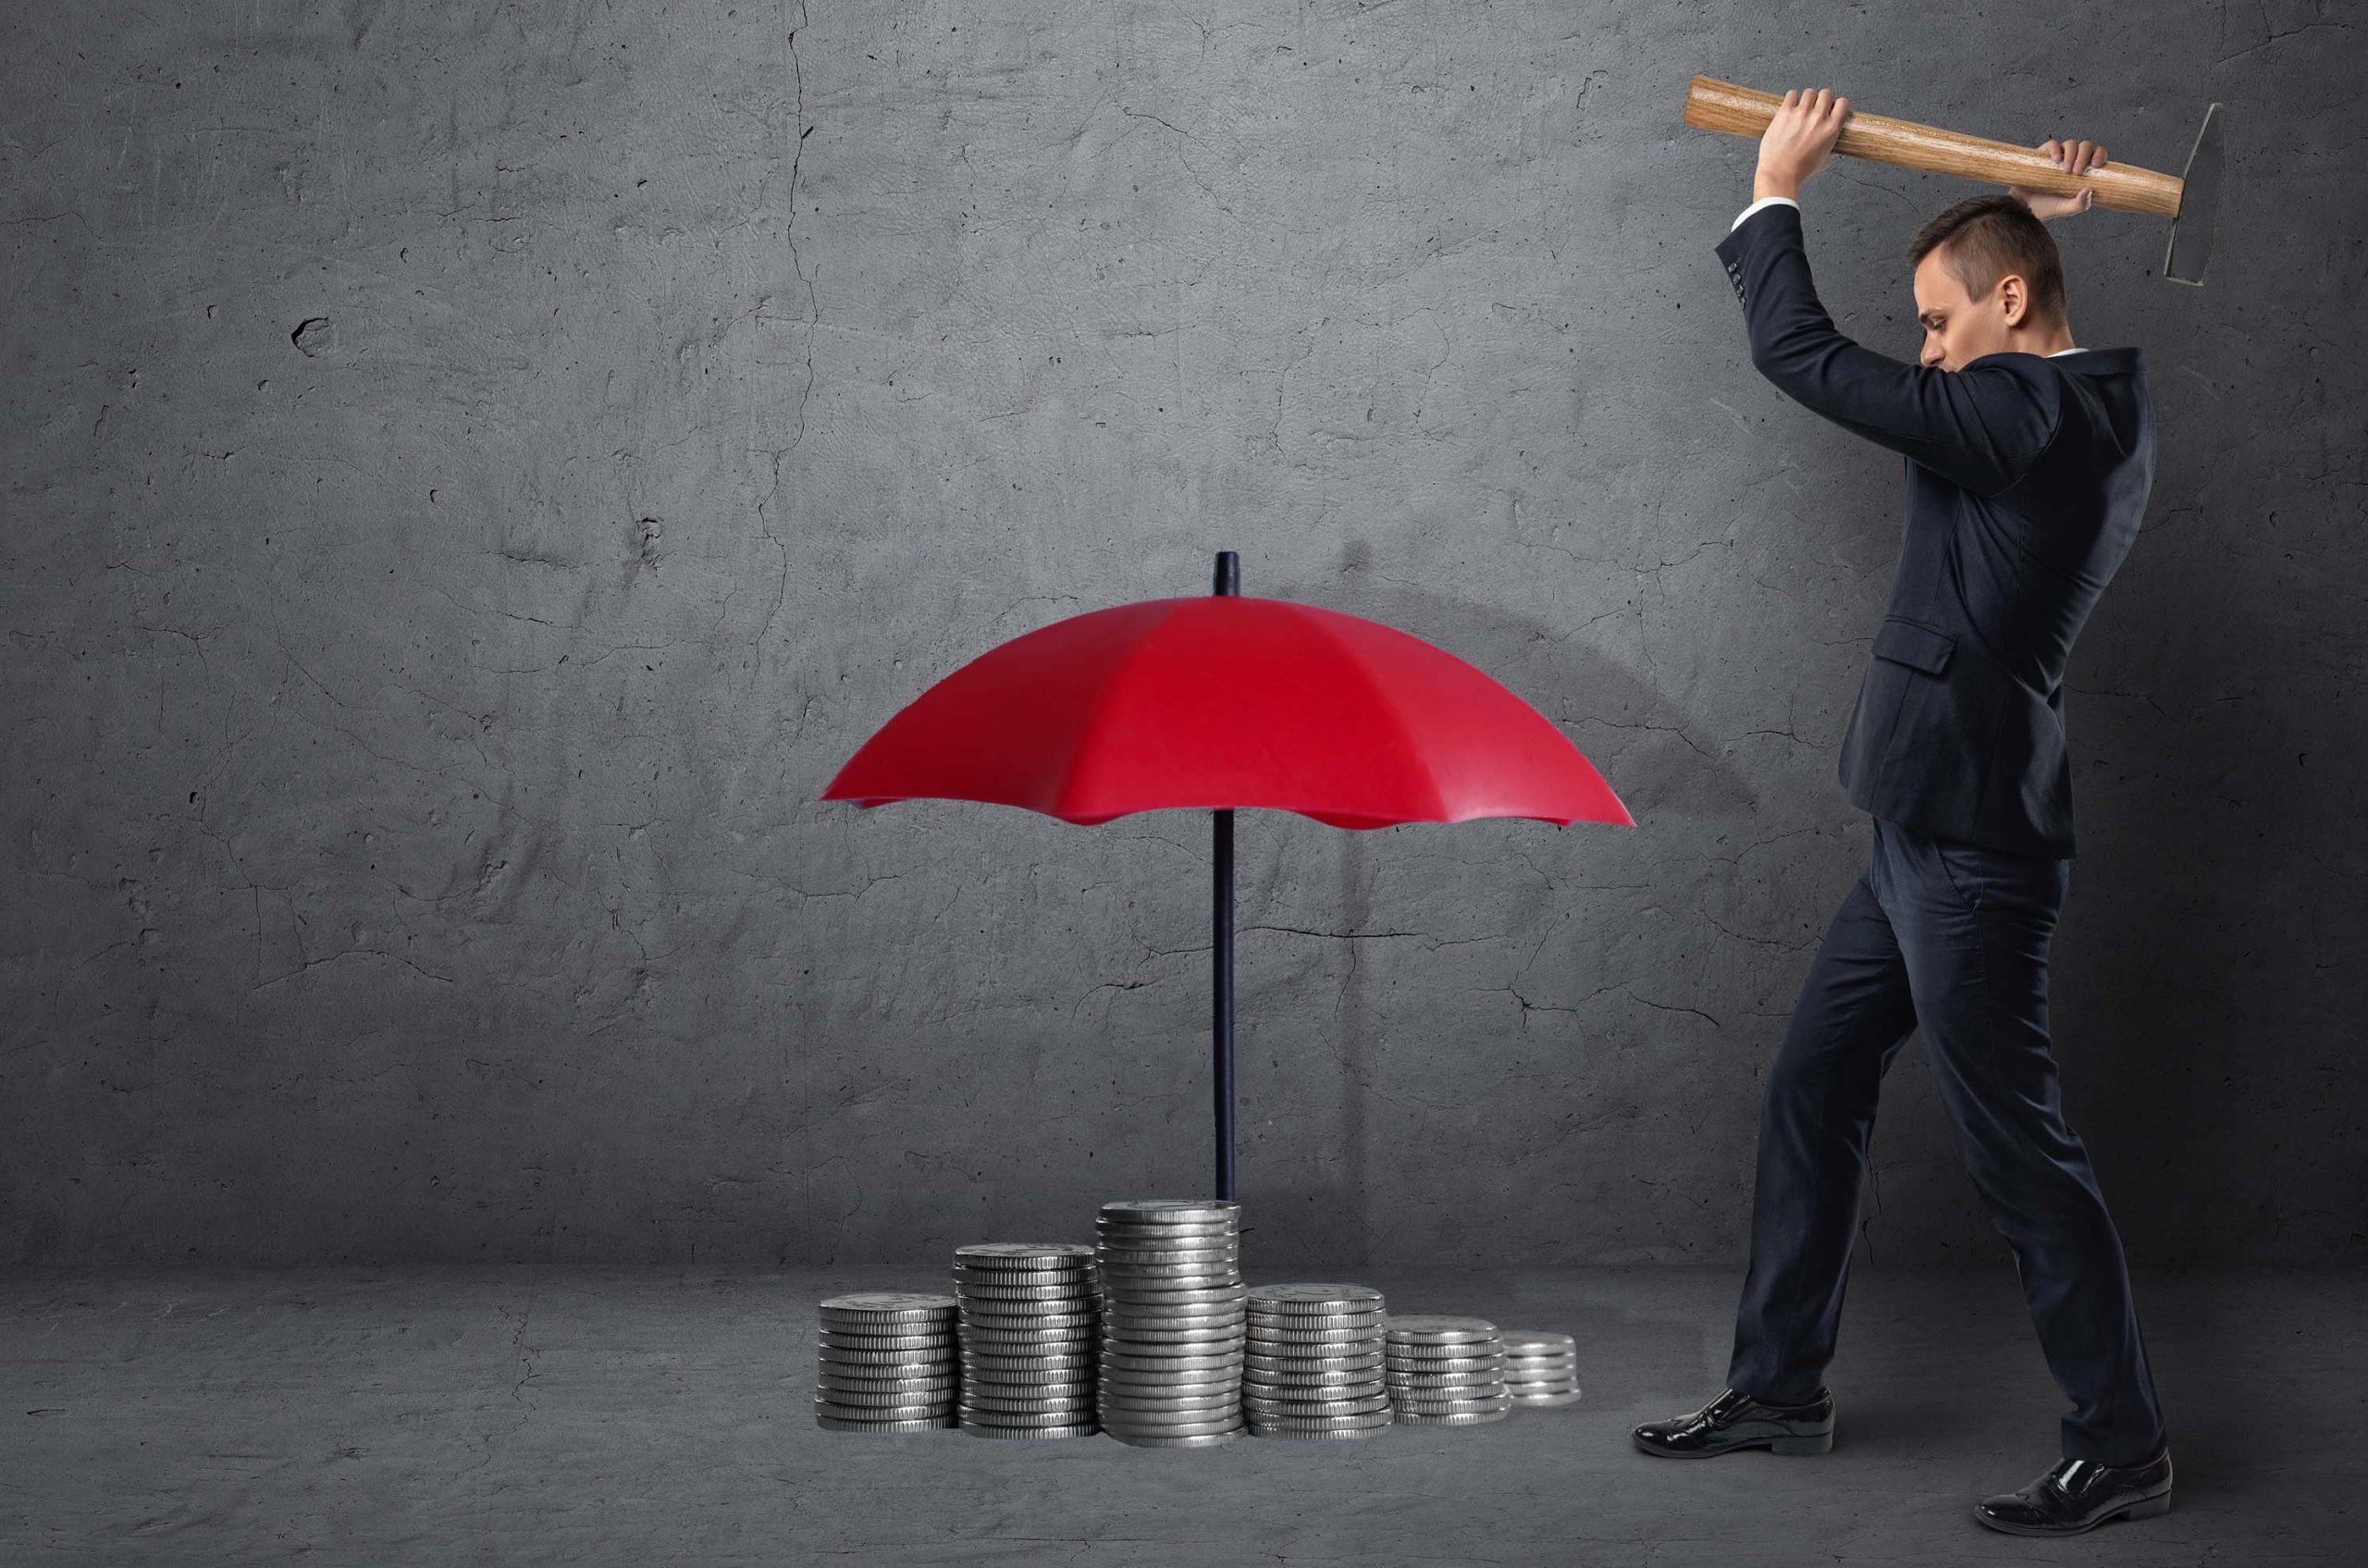 Man Holding hammer about to smash an umbrella with money underneath it.